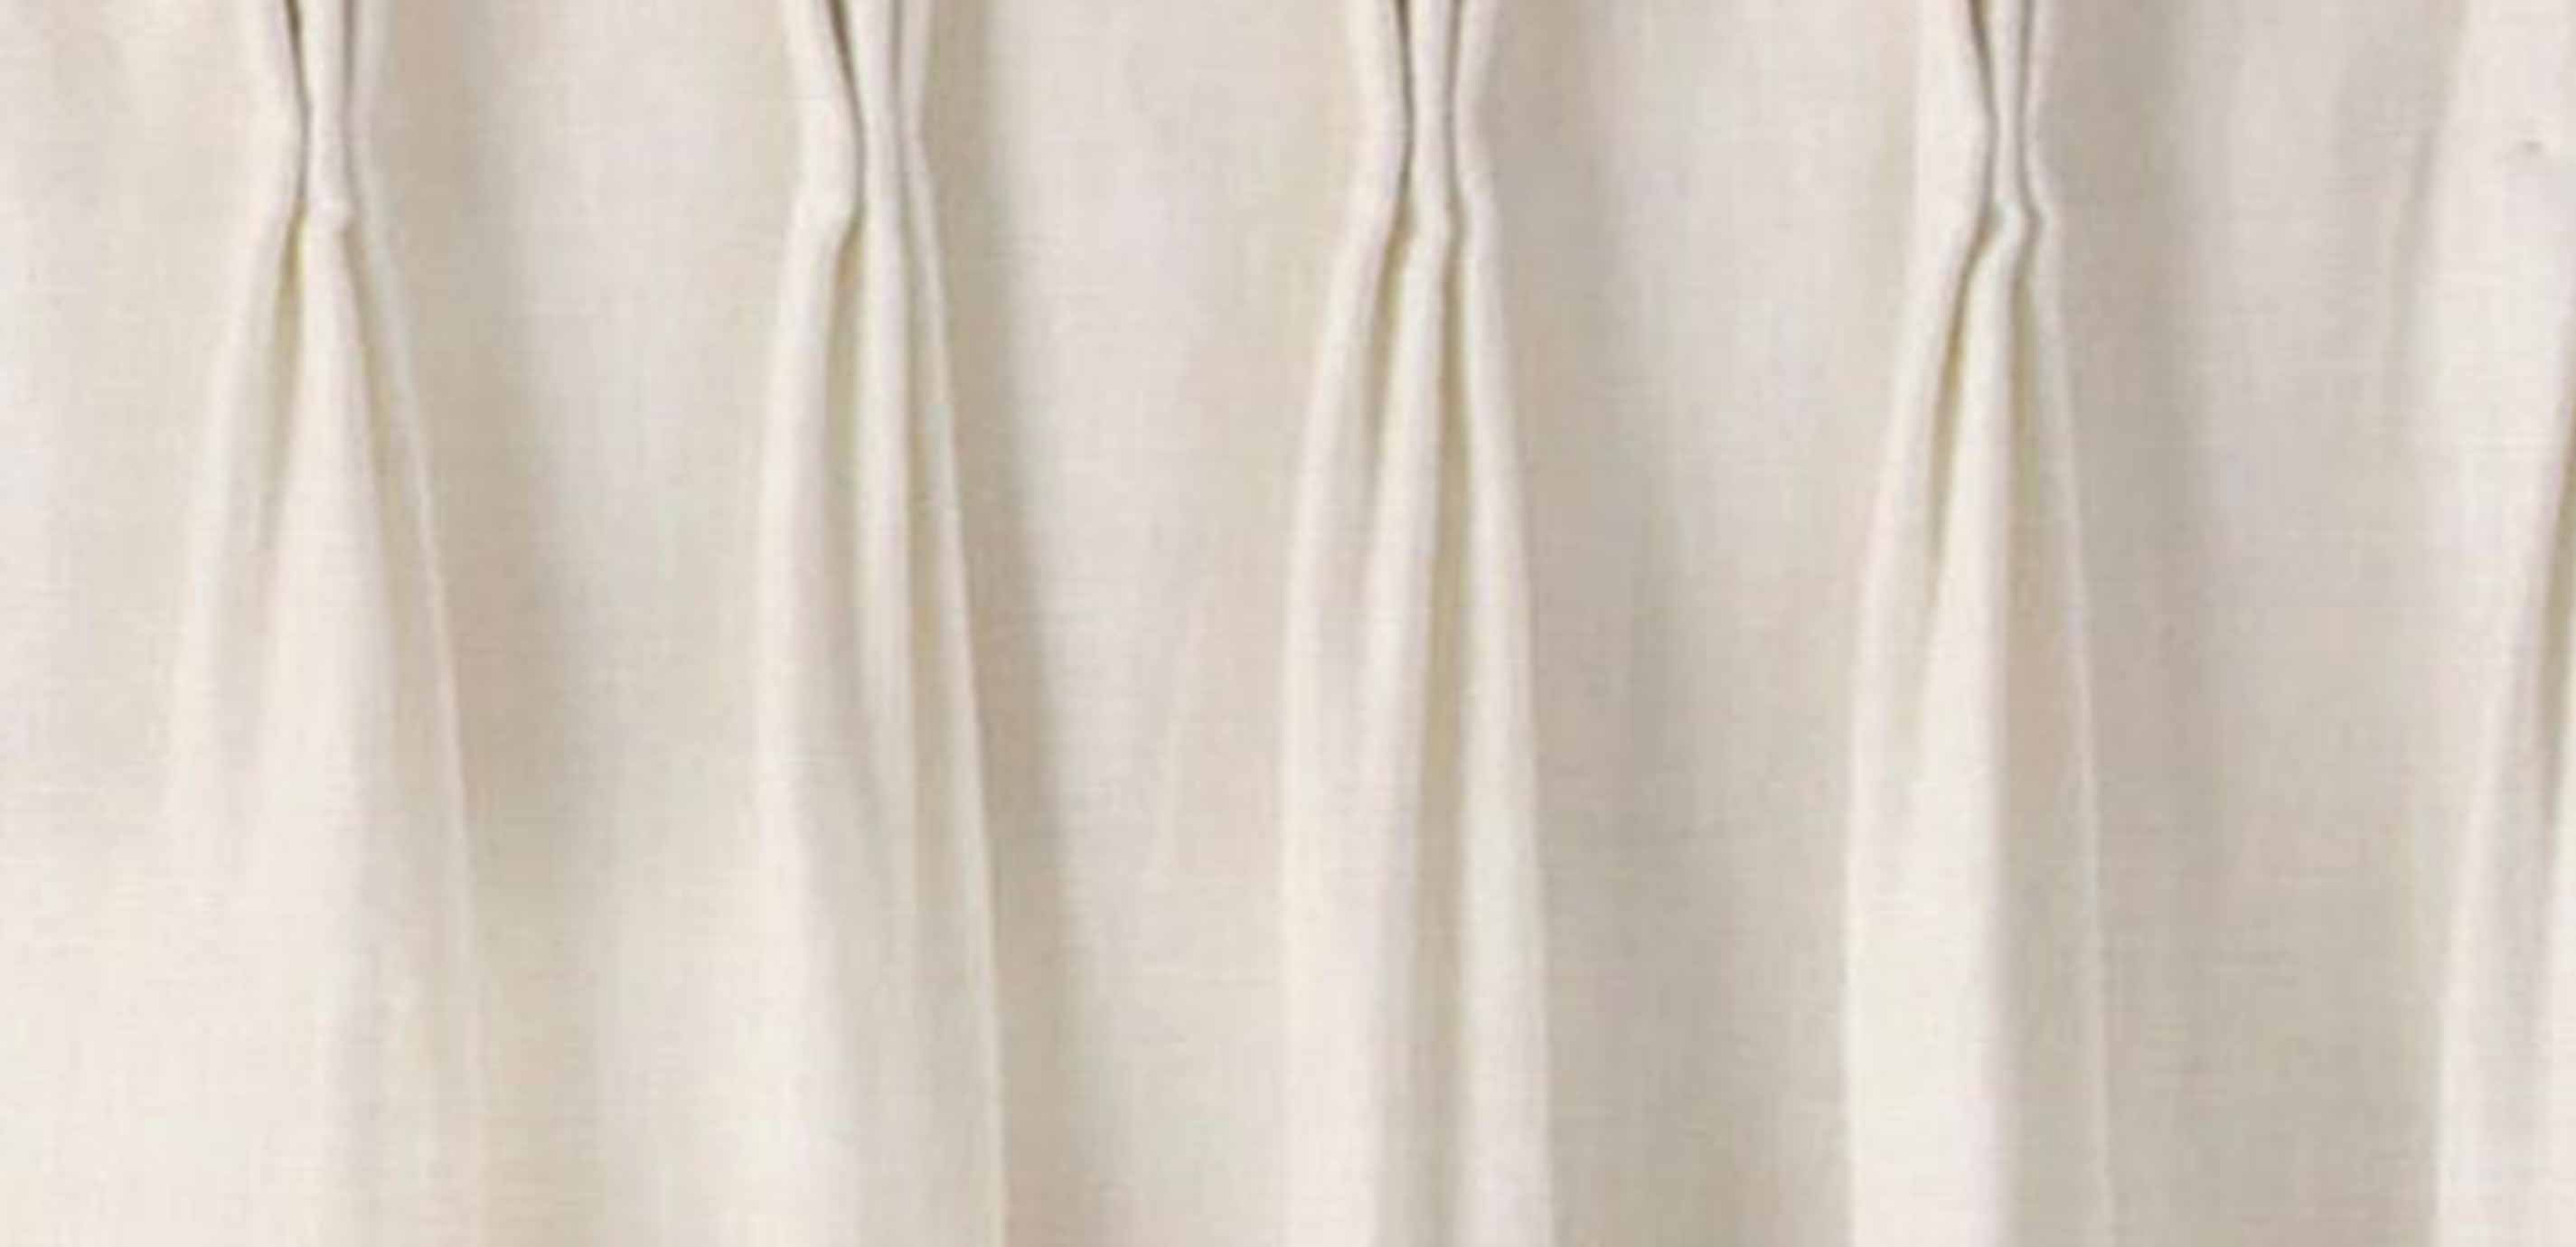  Rayon Linen Blend White, Fabric by the Yard : Arts